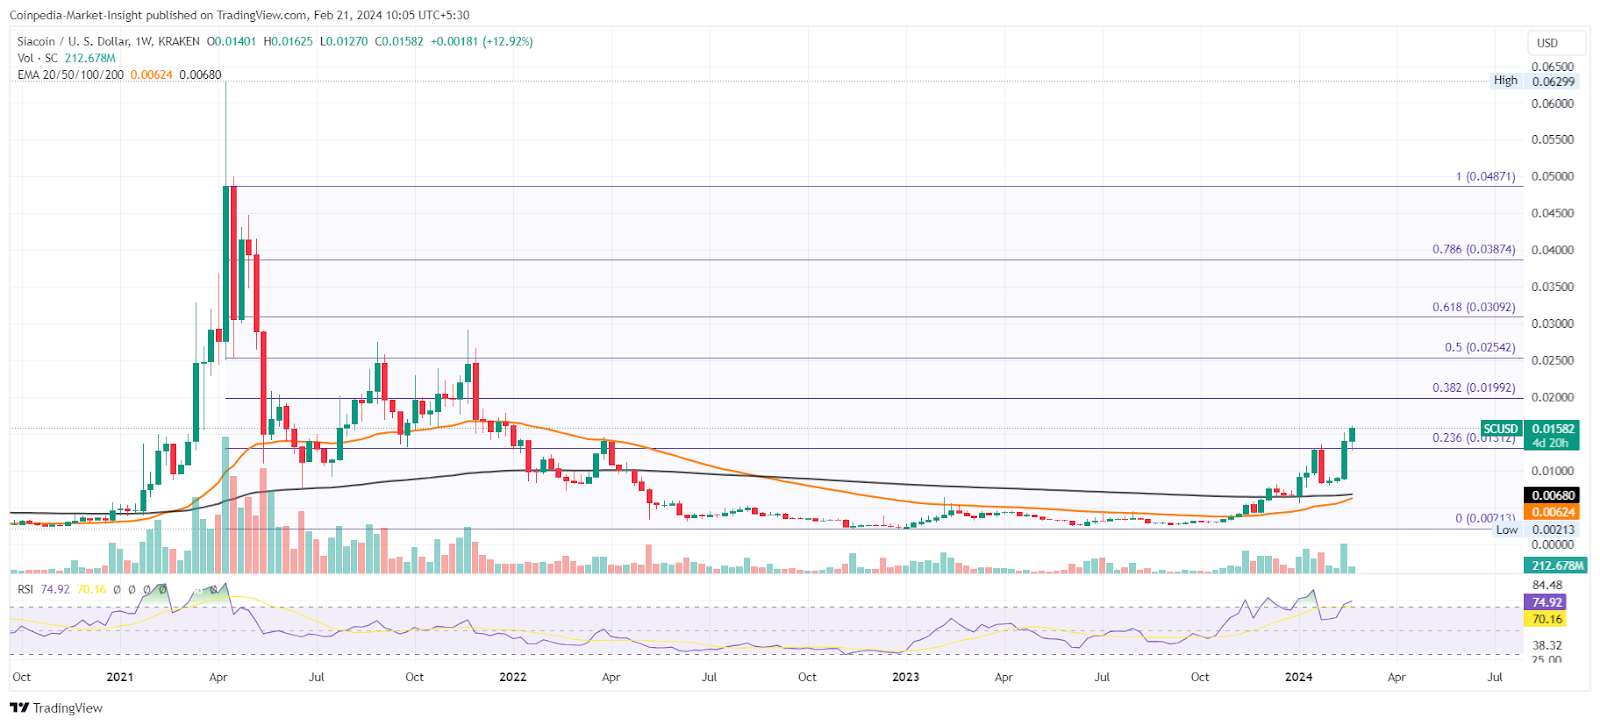 Siacoin and Chiliz Price Prediction: Can Top Performers Prolong The Bull Run?